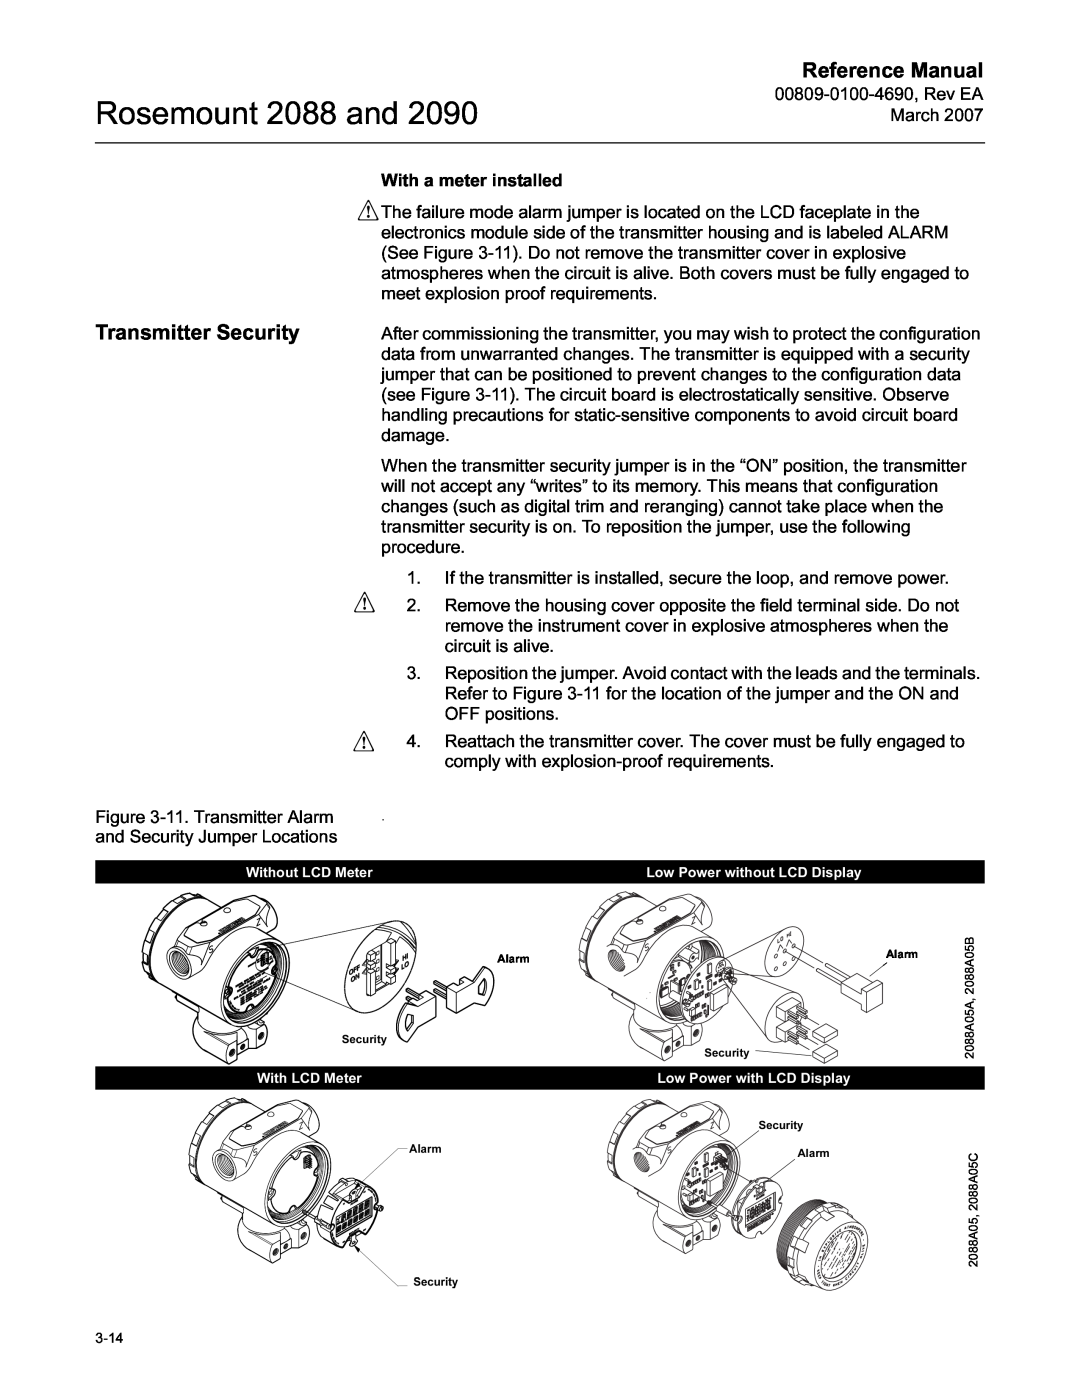 Emerson Process Management 2090 manual Transmitter Security, Rosemount 2088 and, Reference Manual 